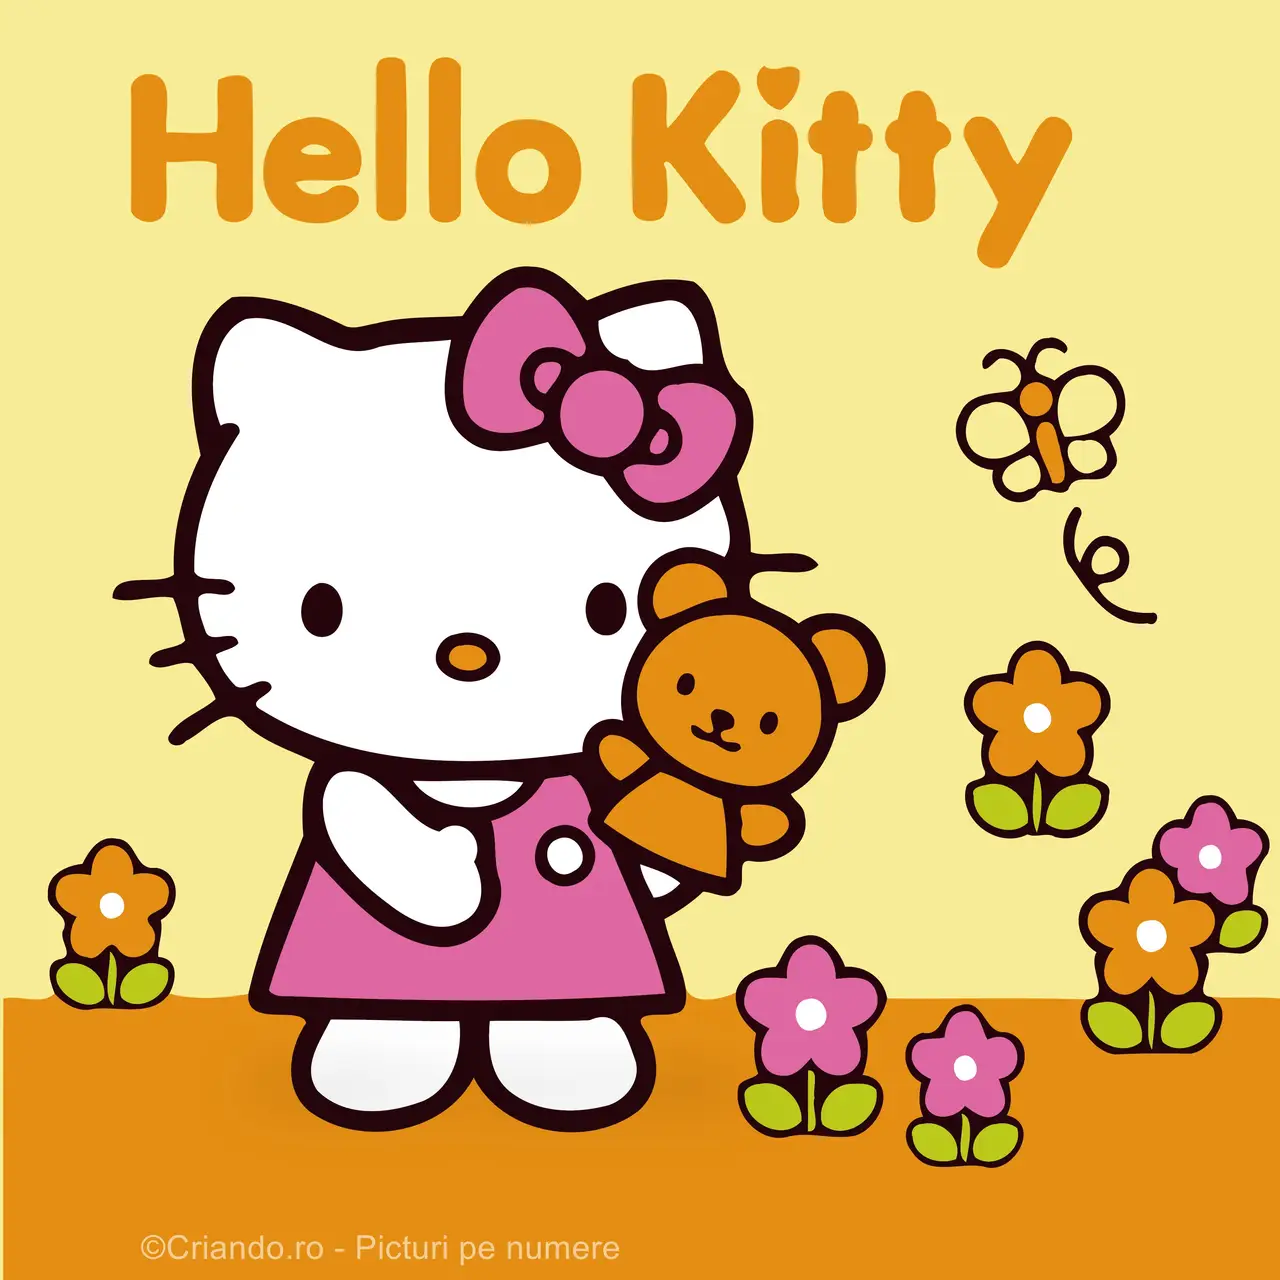 Pictura pe numere copii 30x30 cm, Hello Kitty, PDP3085